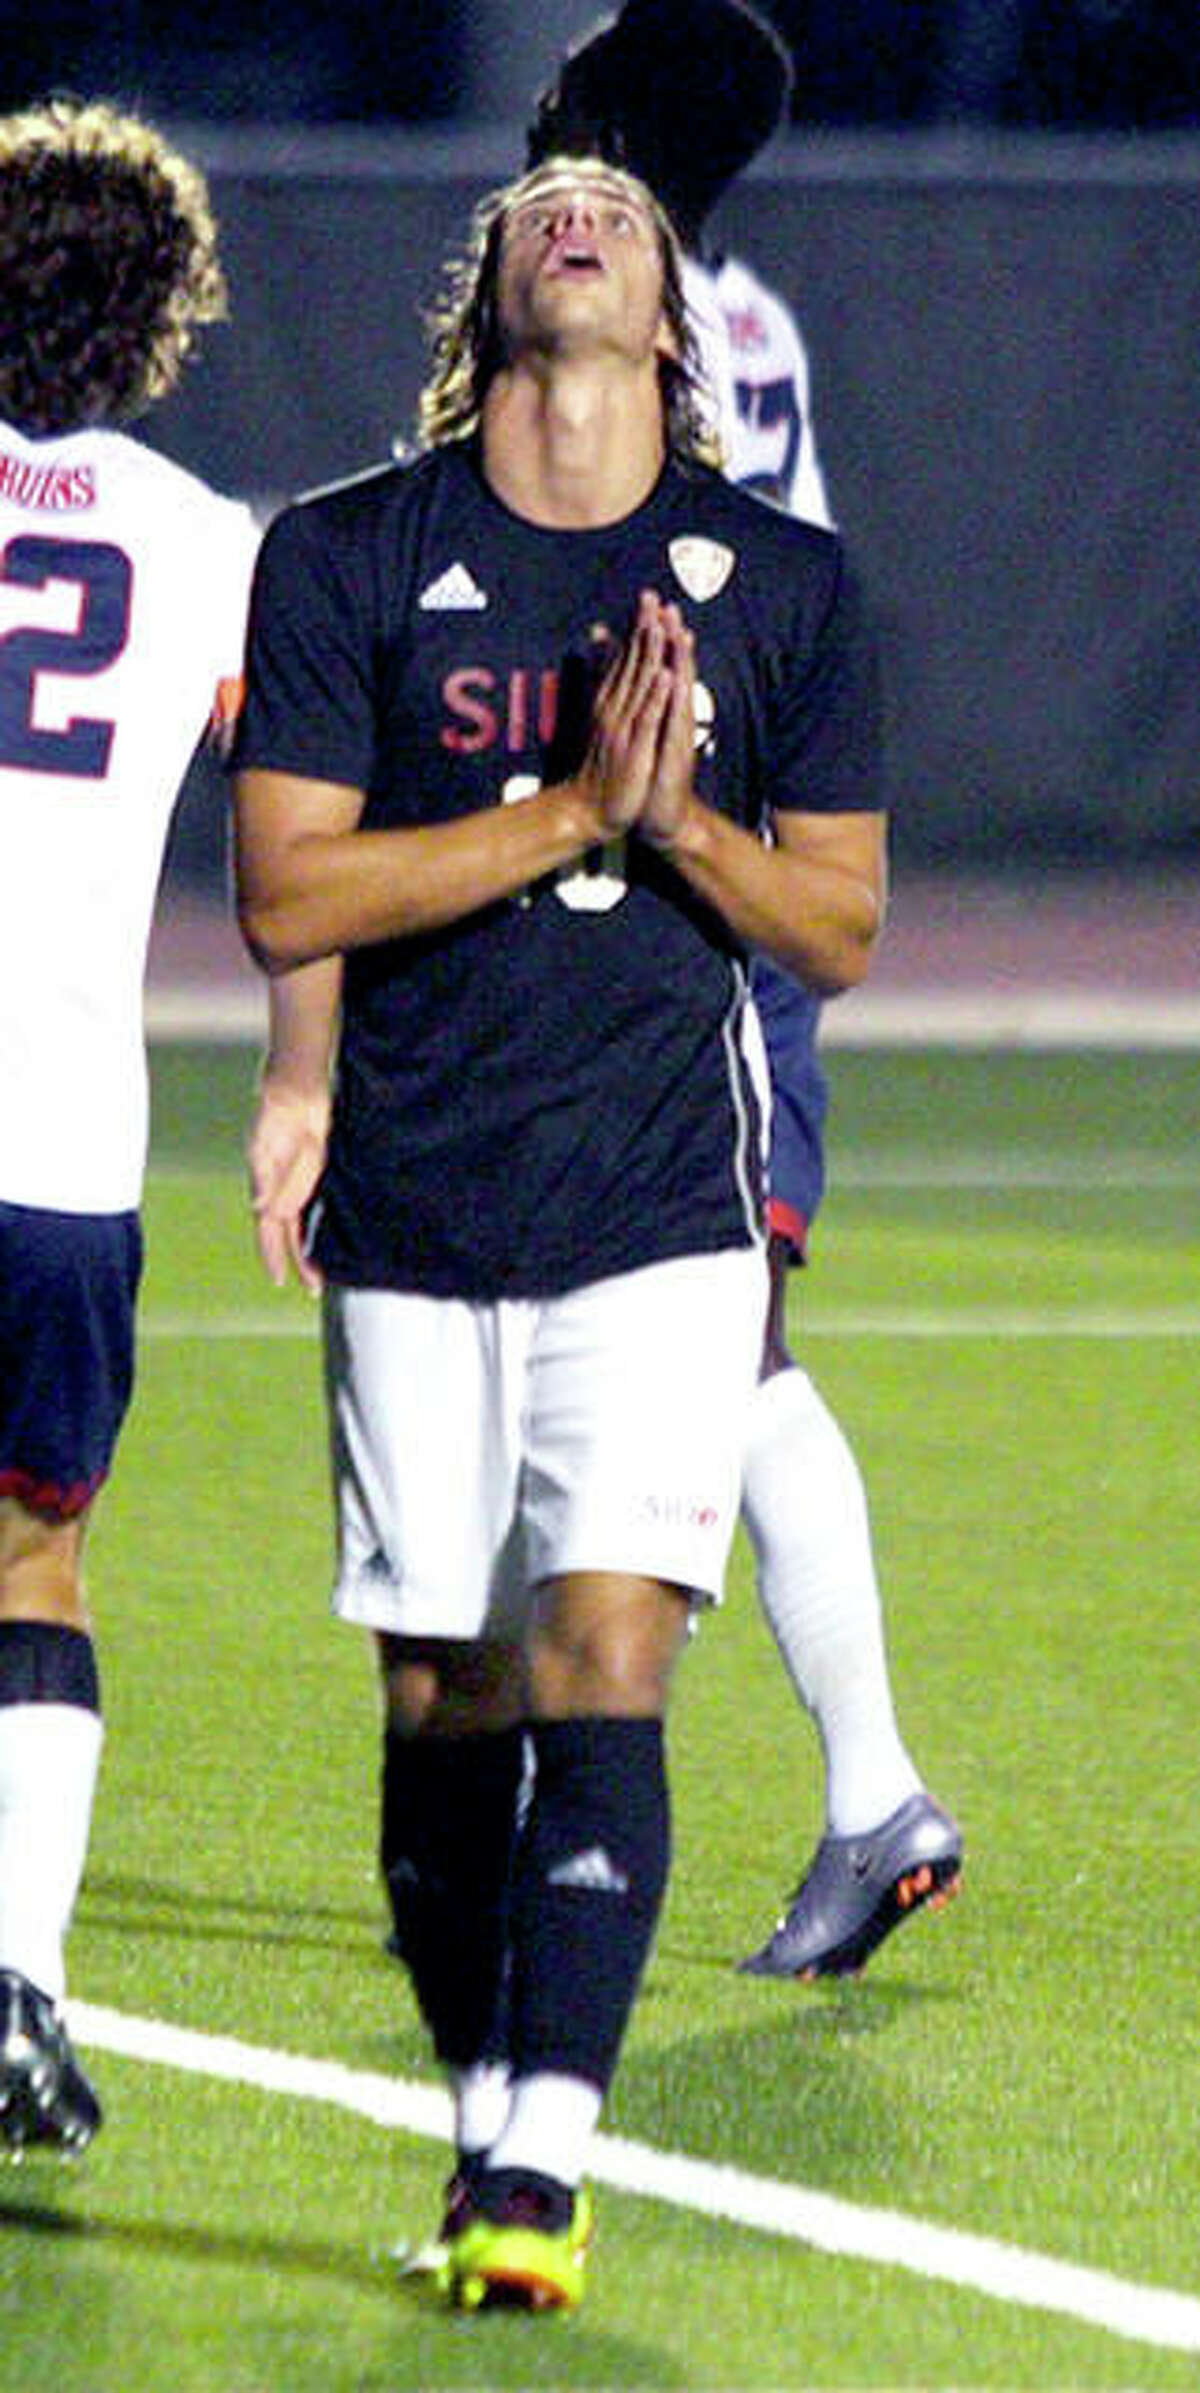 Jorge Gonzalez of SIUE looks skyward and folds his hands during the team’s 2-0 victory over Belmont Saturday night at Korte Stadium. Gonzalez leads the 6-1-2 Cougars with six goals. SIUE will travel to Indianapolis Tuesday to face IUPUI.